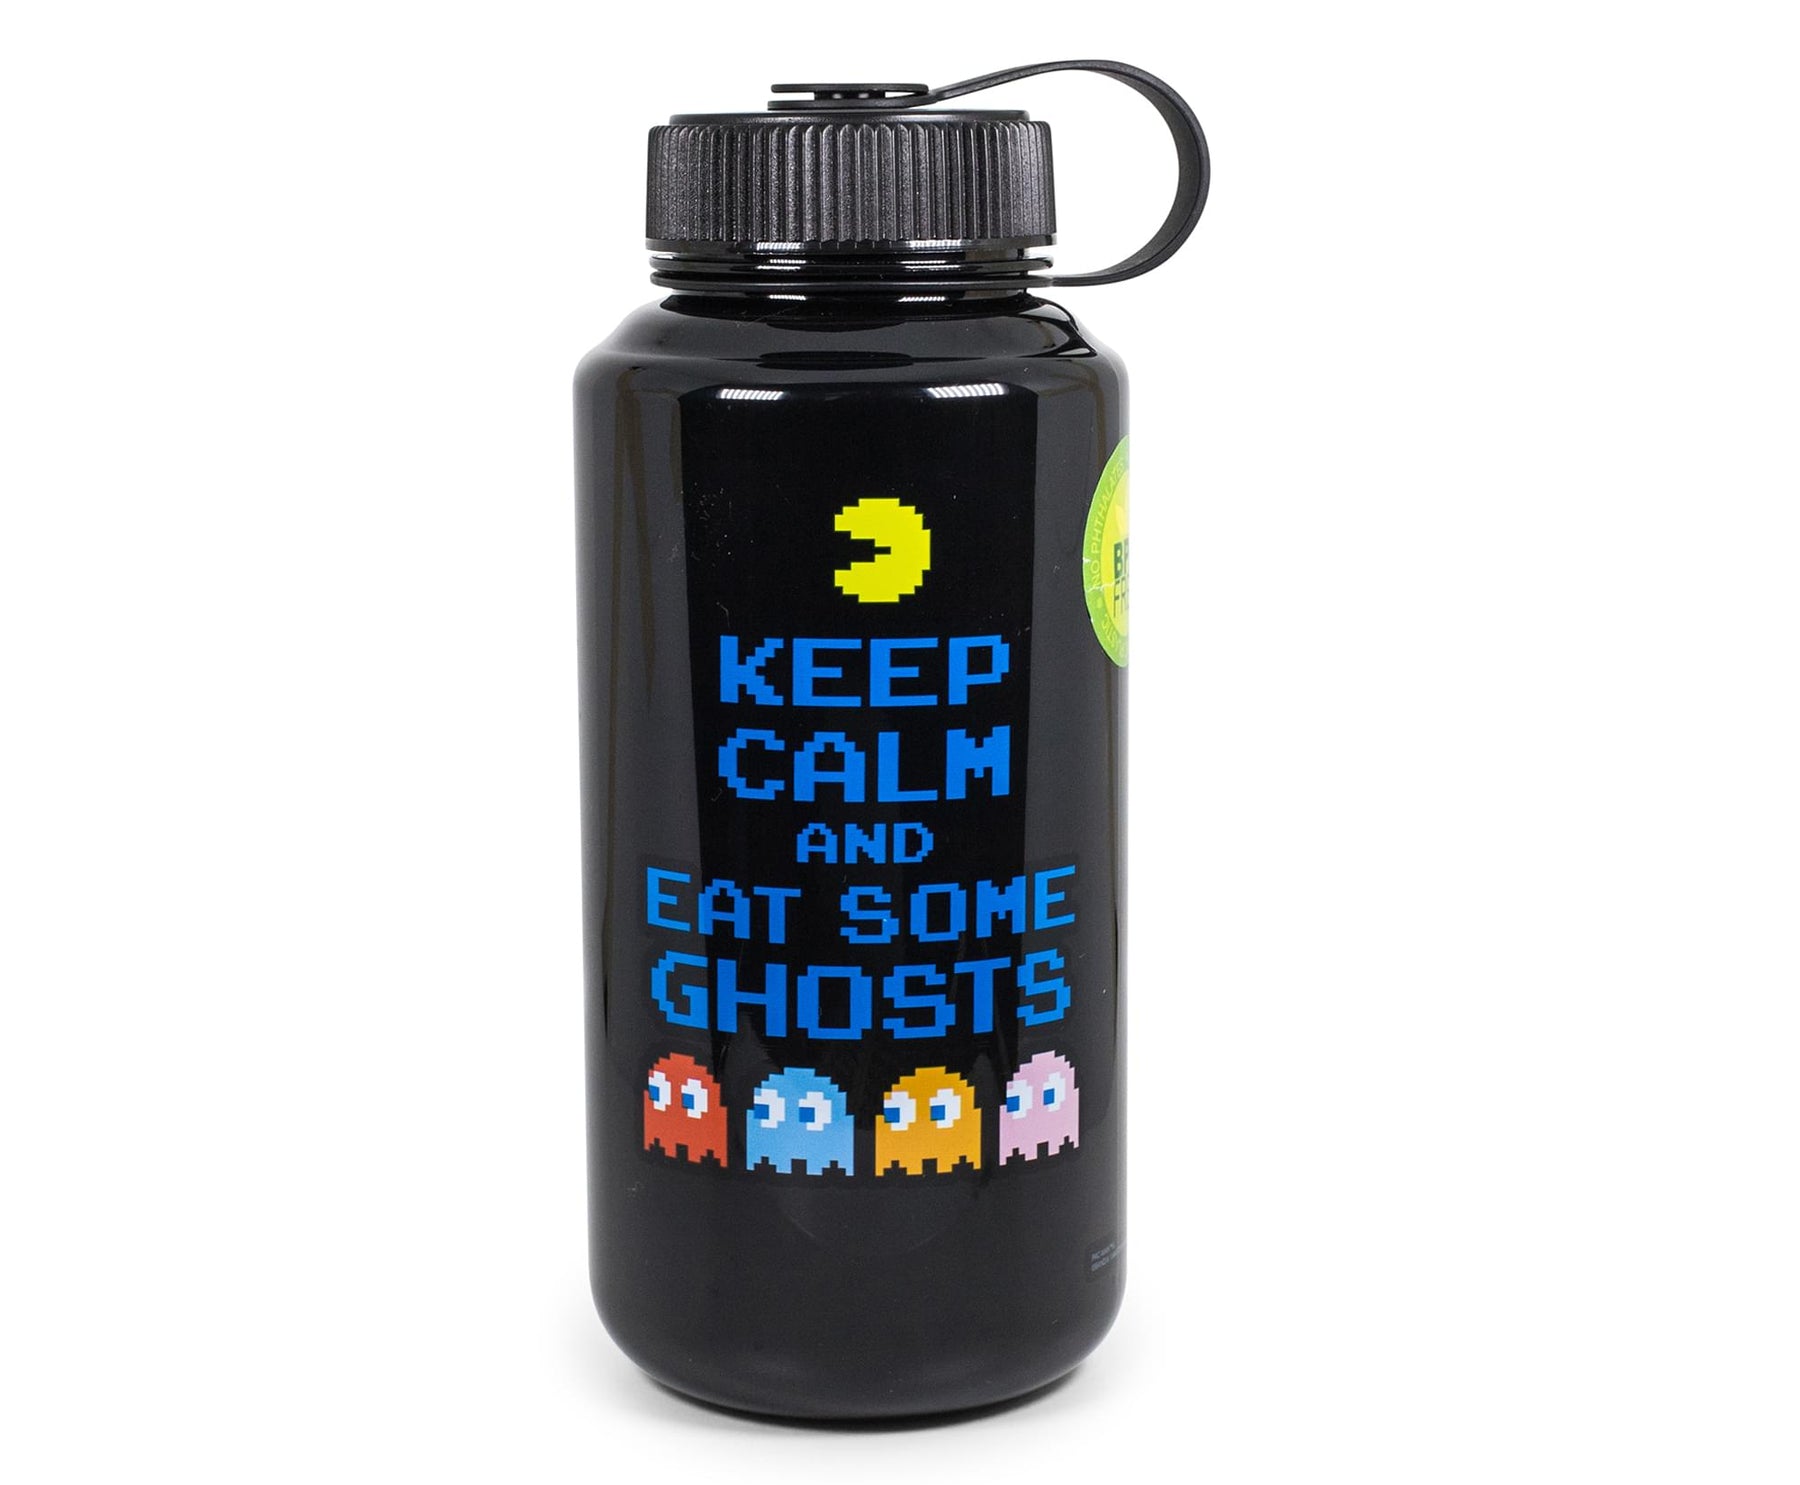 Pac-Man "Keep Calm and Eat Some Ghosts" Plastic Water Bottle | Holds 32 Ounces